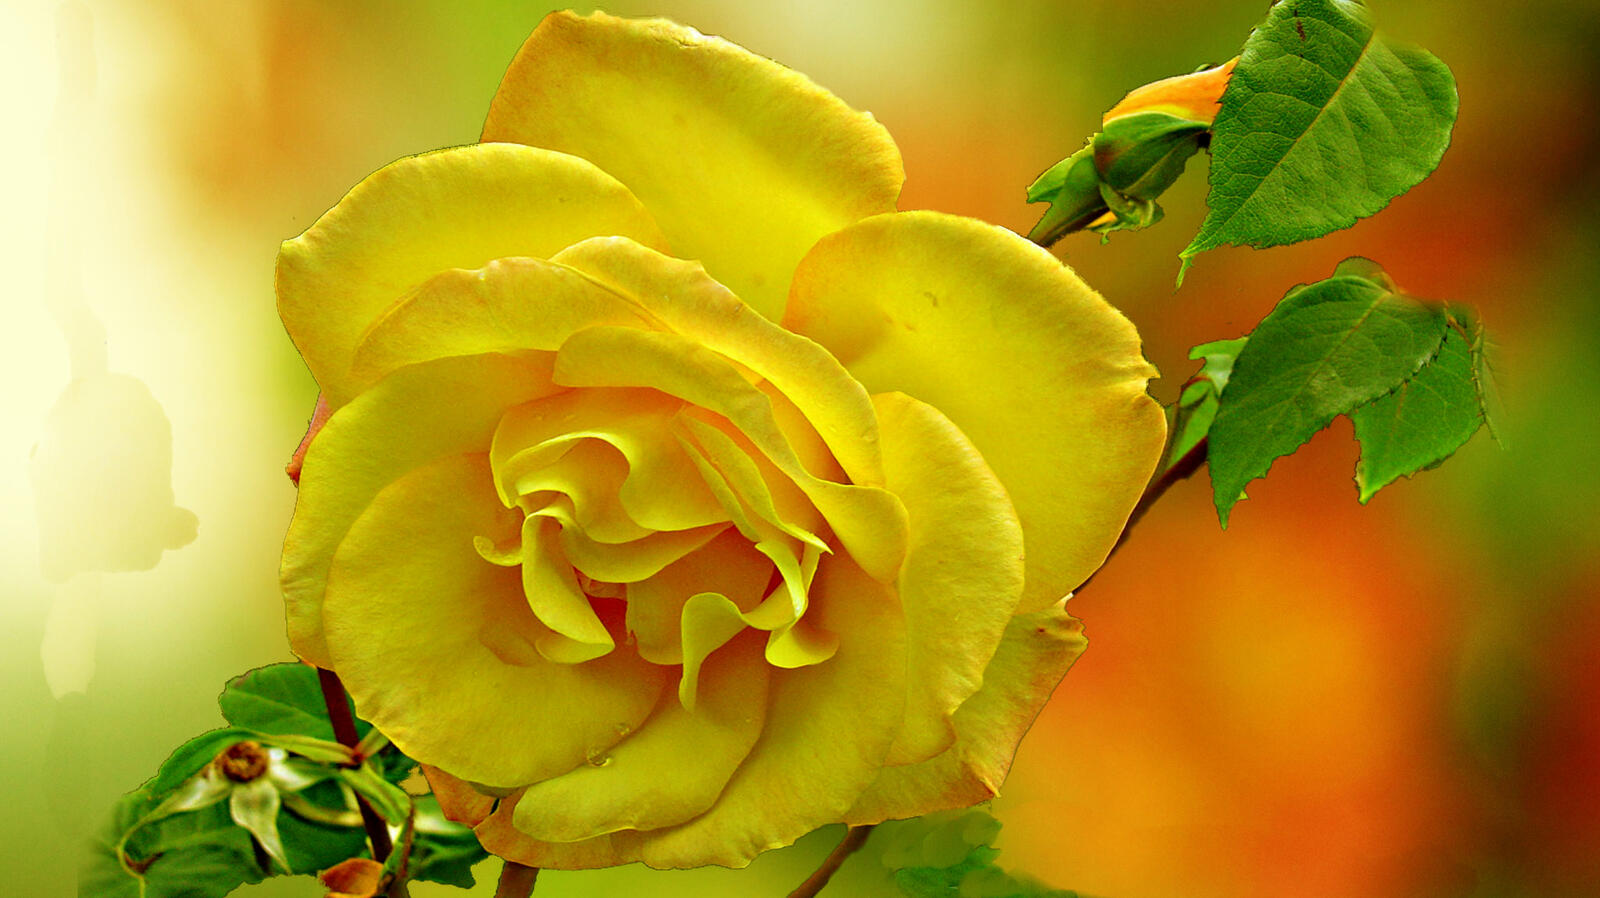 Wallpapers yellow bud rose lonely rose on the desktop